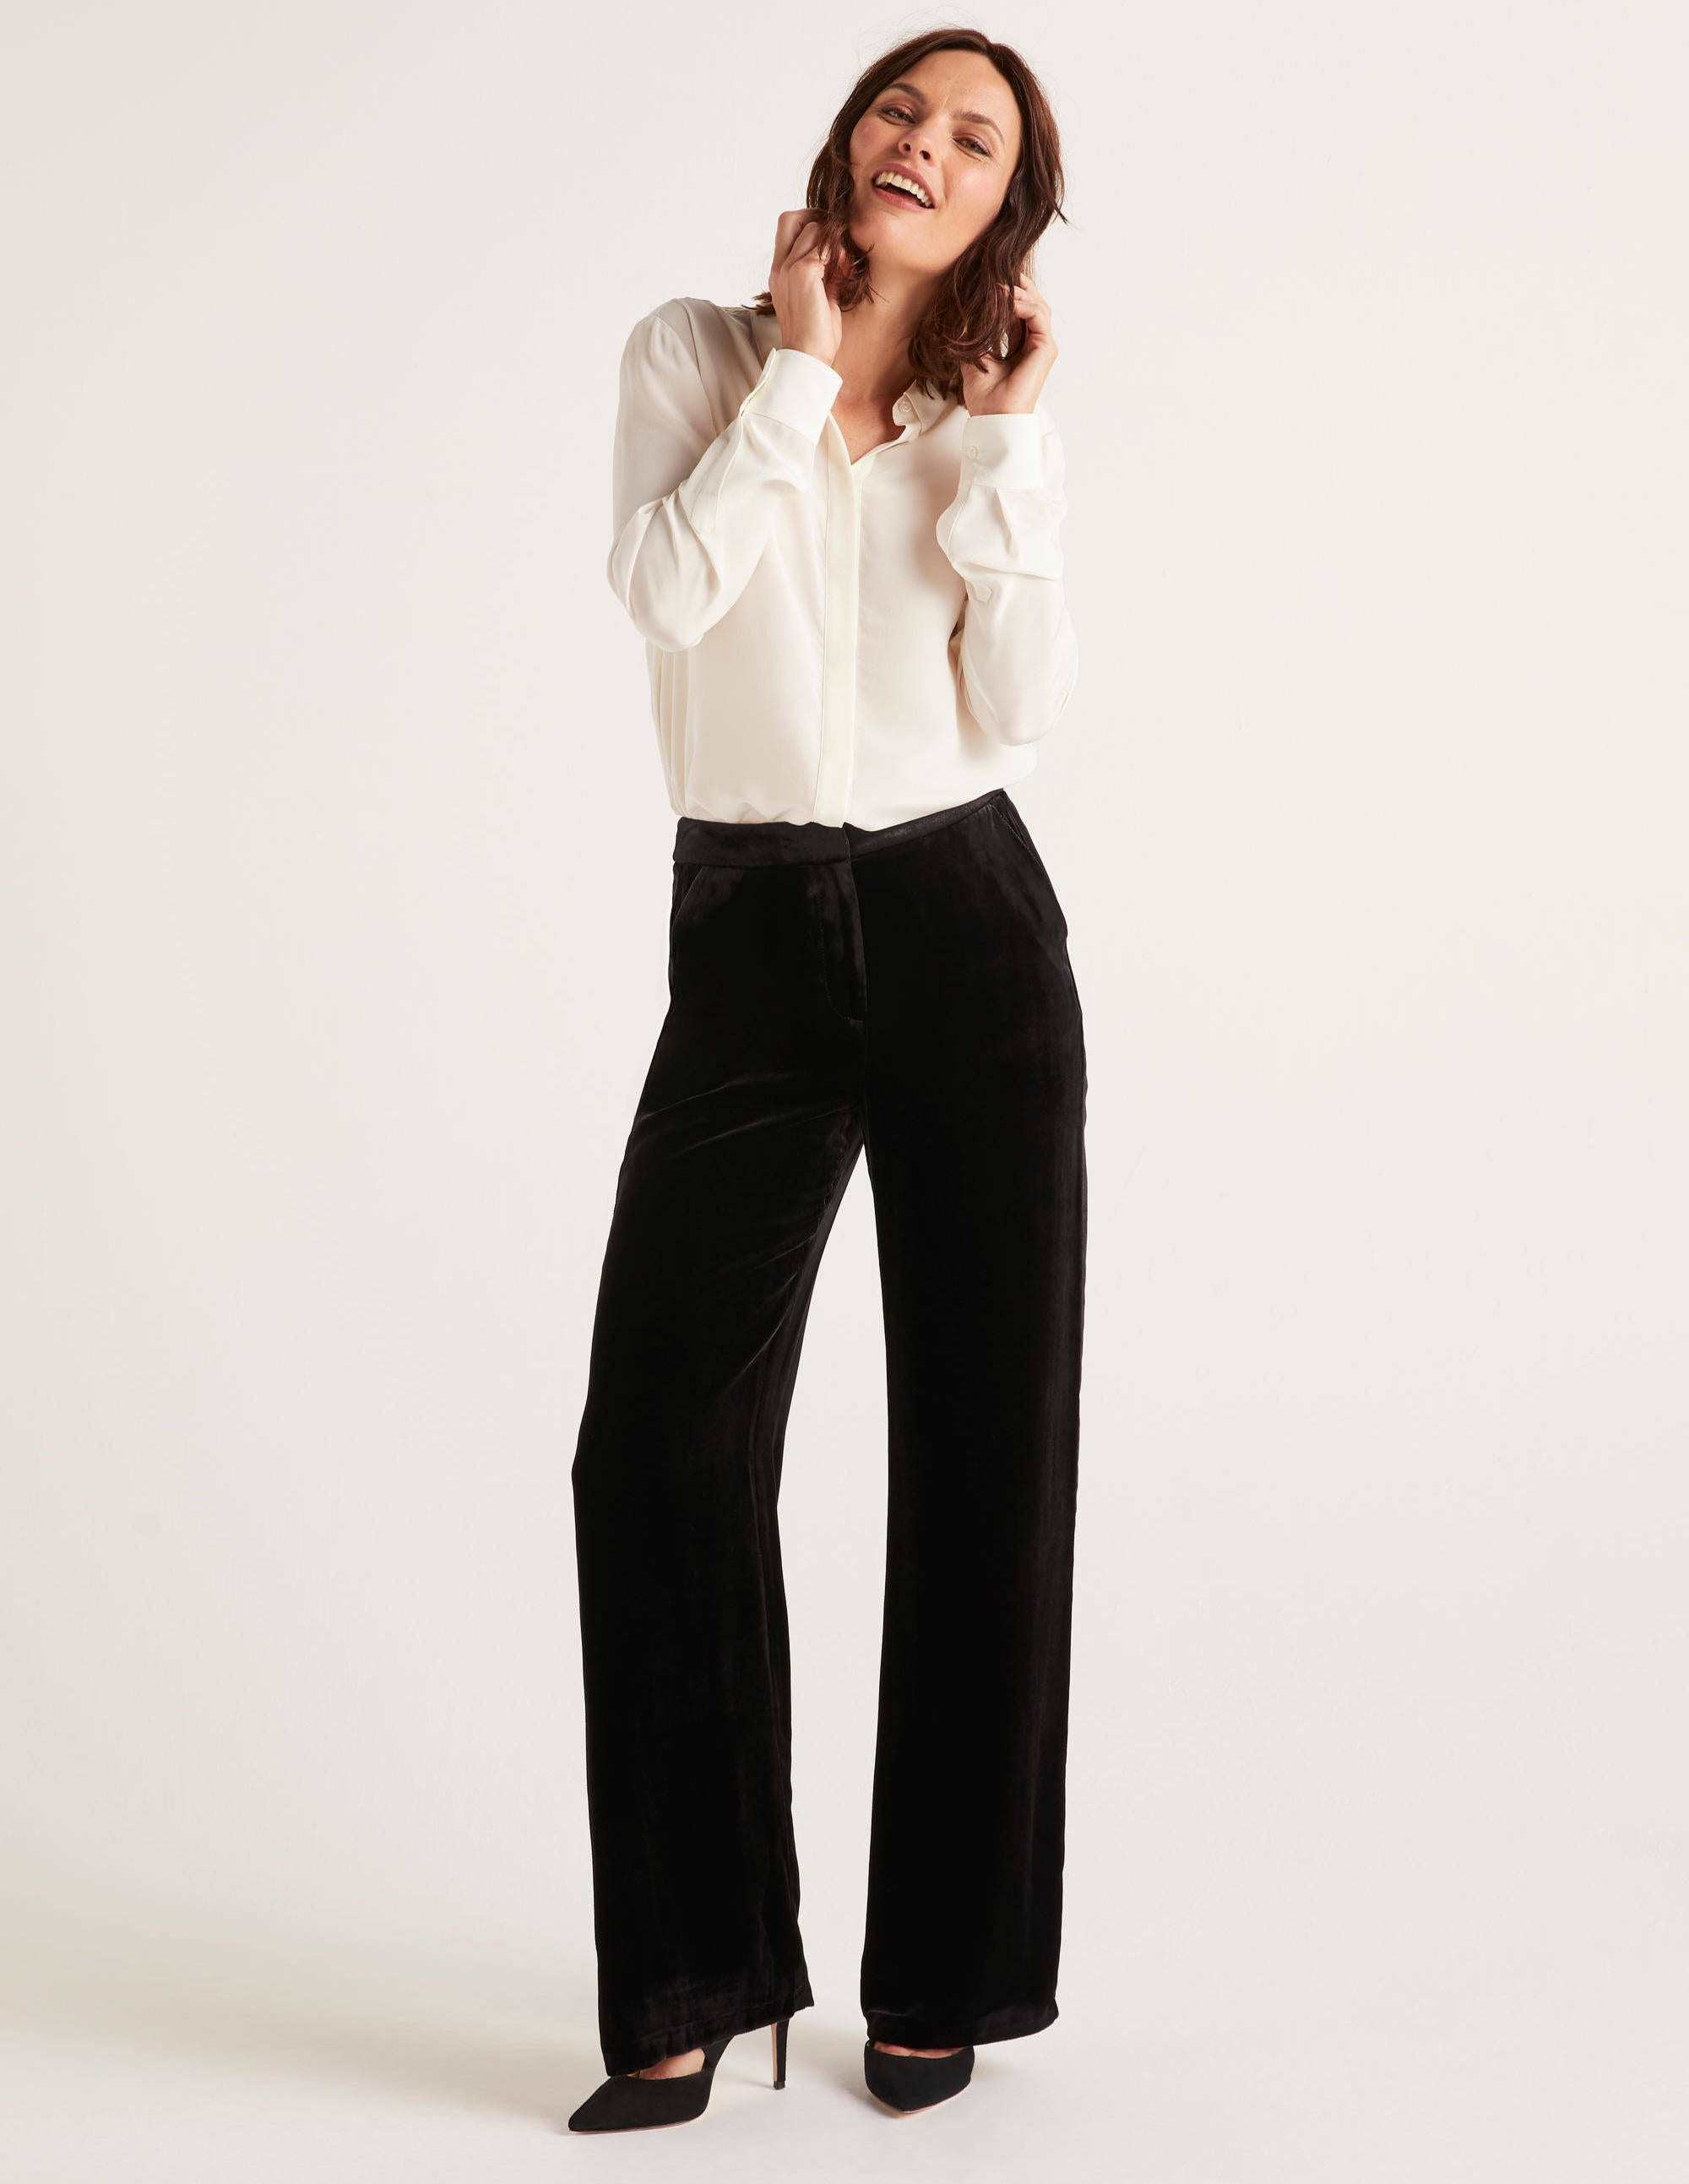 Bodens velvet lounge suit is the comfortable but chic festive outfit weve  been waiting for